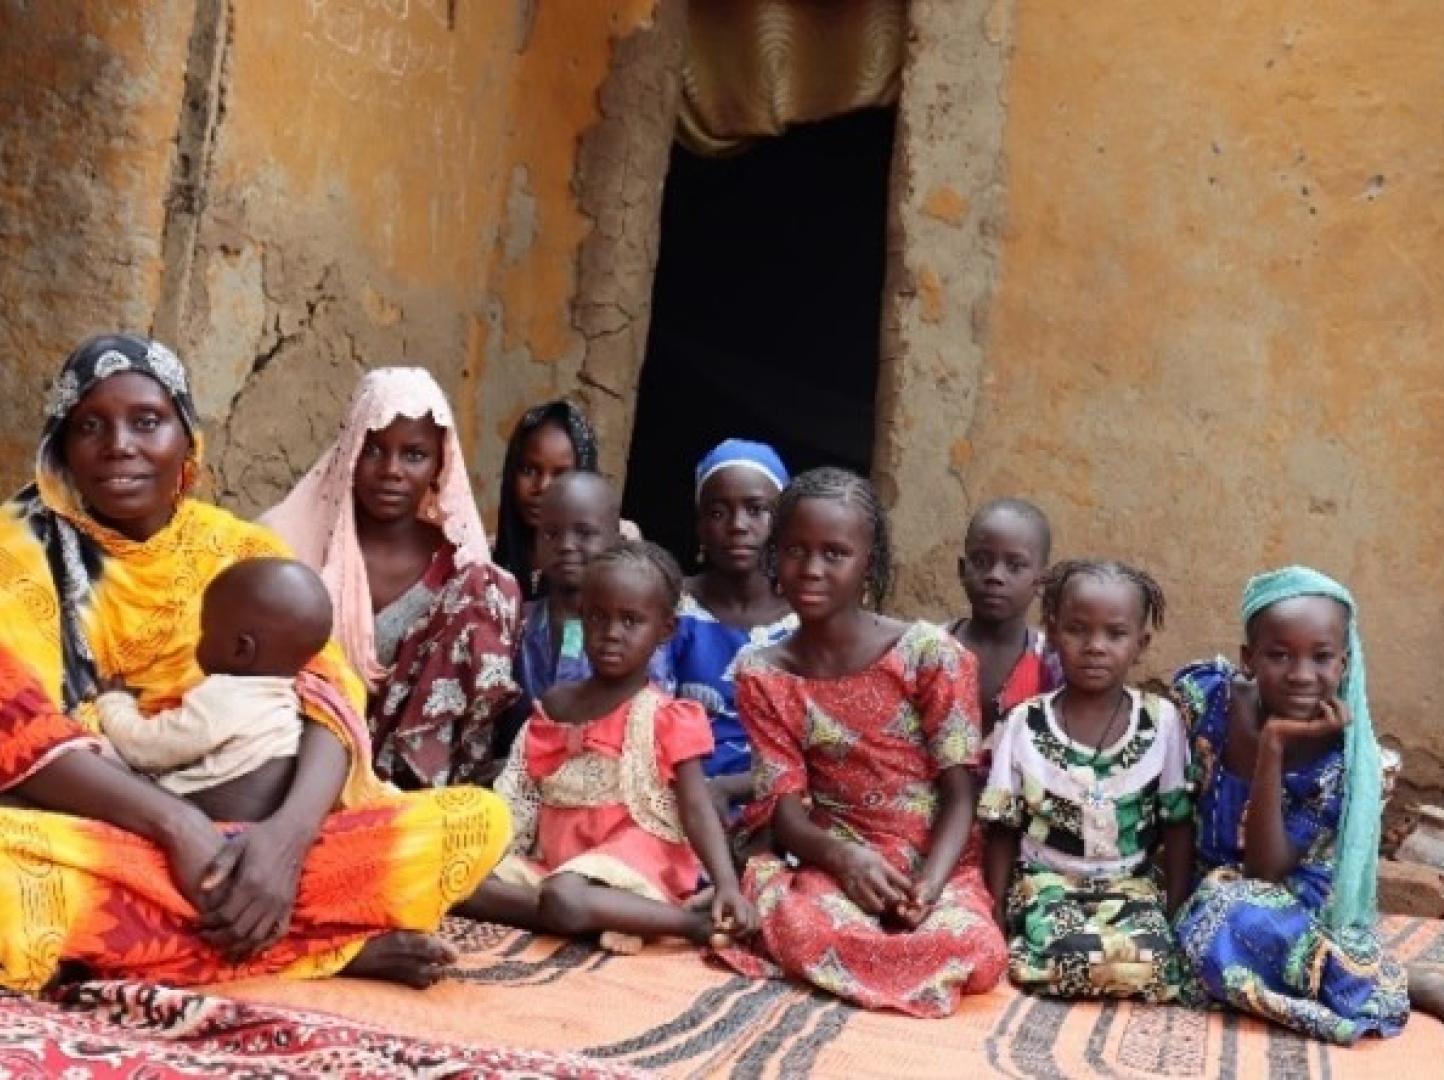 An IDP family in the far North region